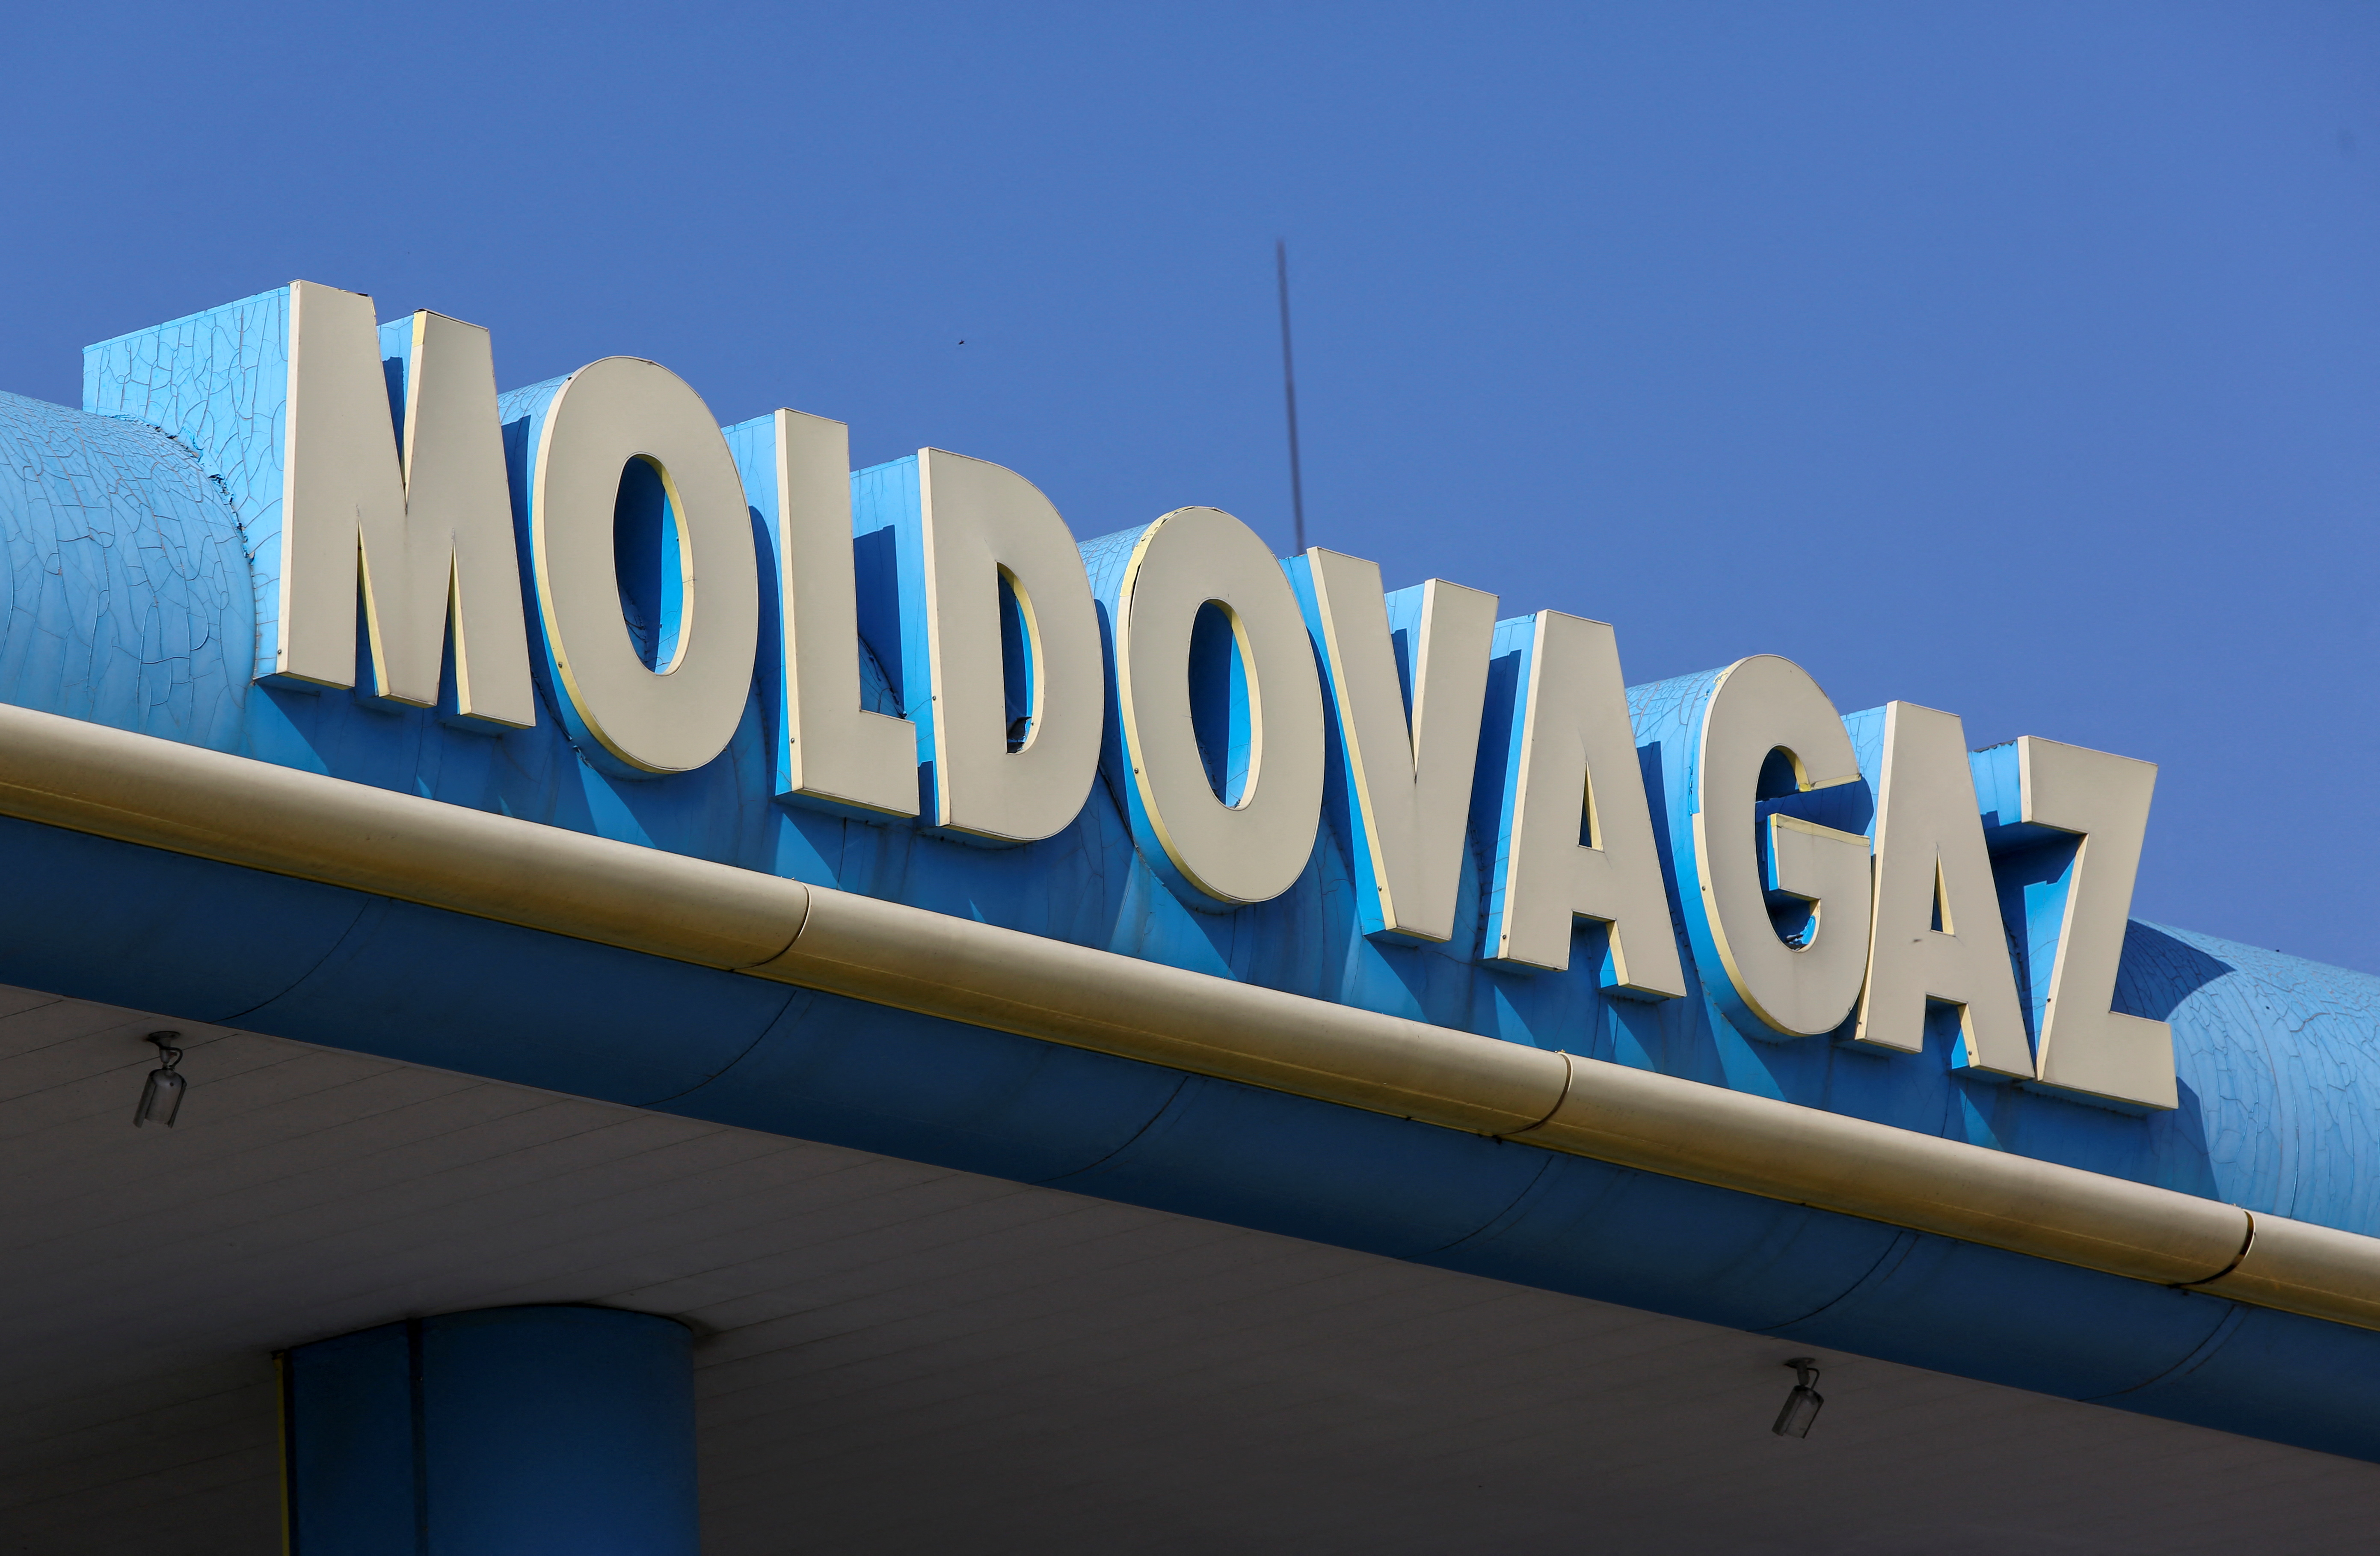 The logo of Moldovagaz energy company is on display in Chisinau